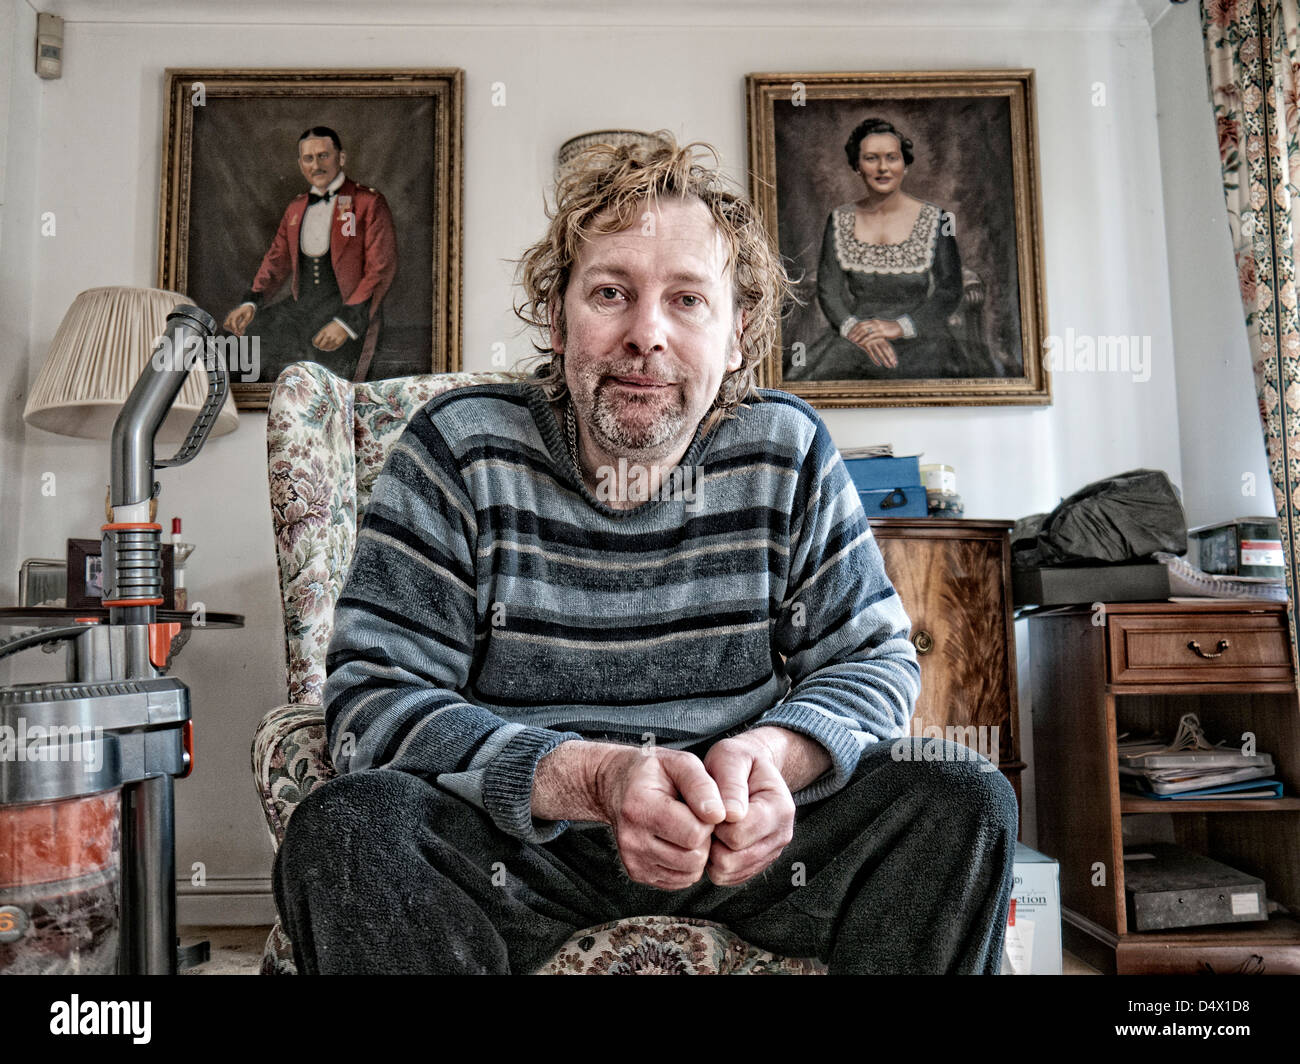 Portrait of a scruffy middle aged man in a middle class drawing room Stock Photo